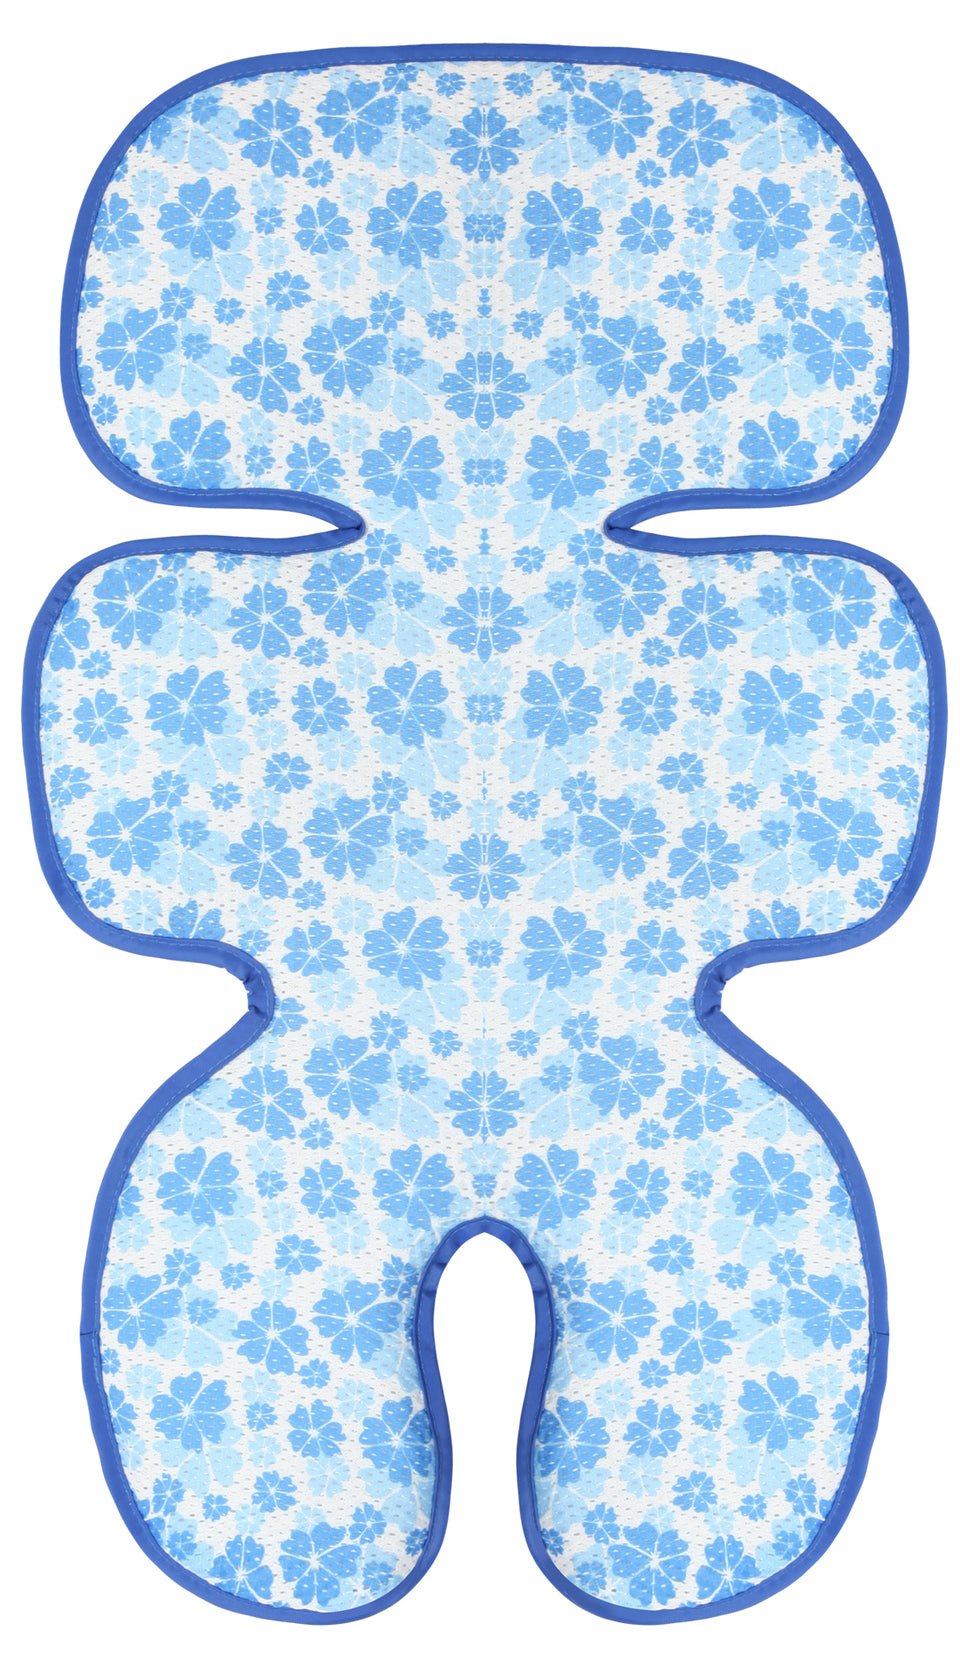 Clean Basic Cool Seat Pad (Flower Blue)